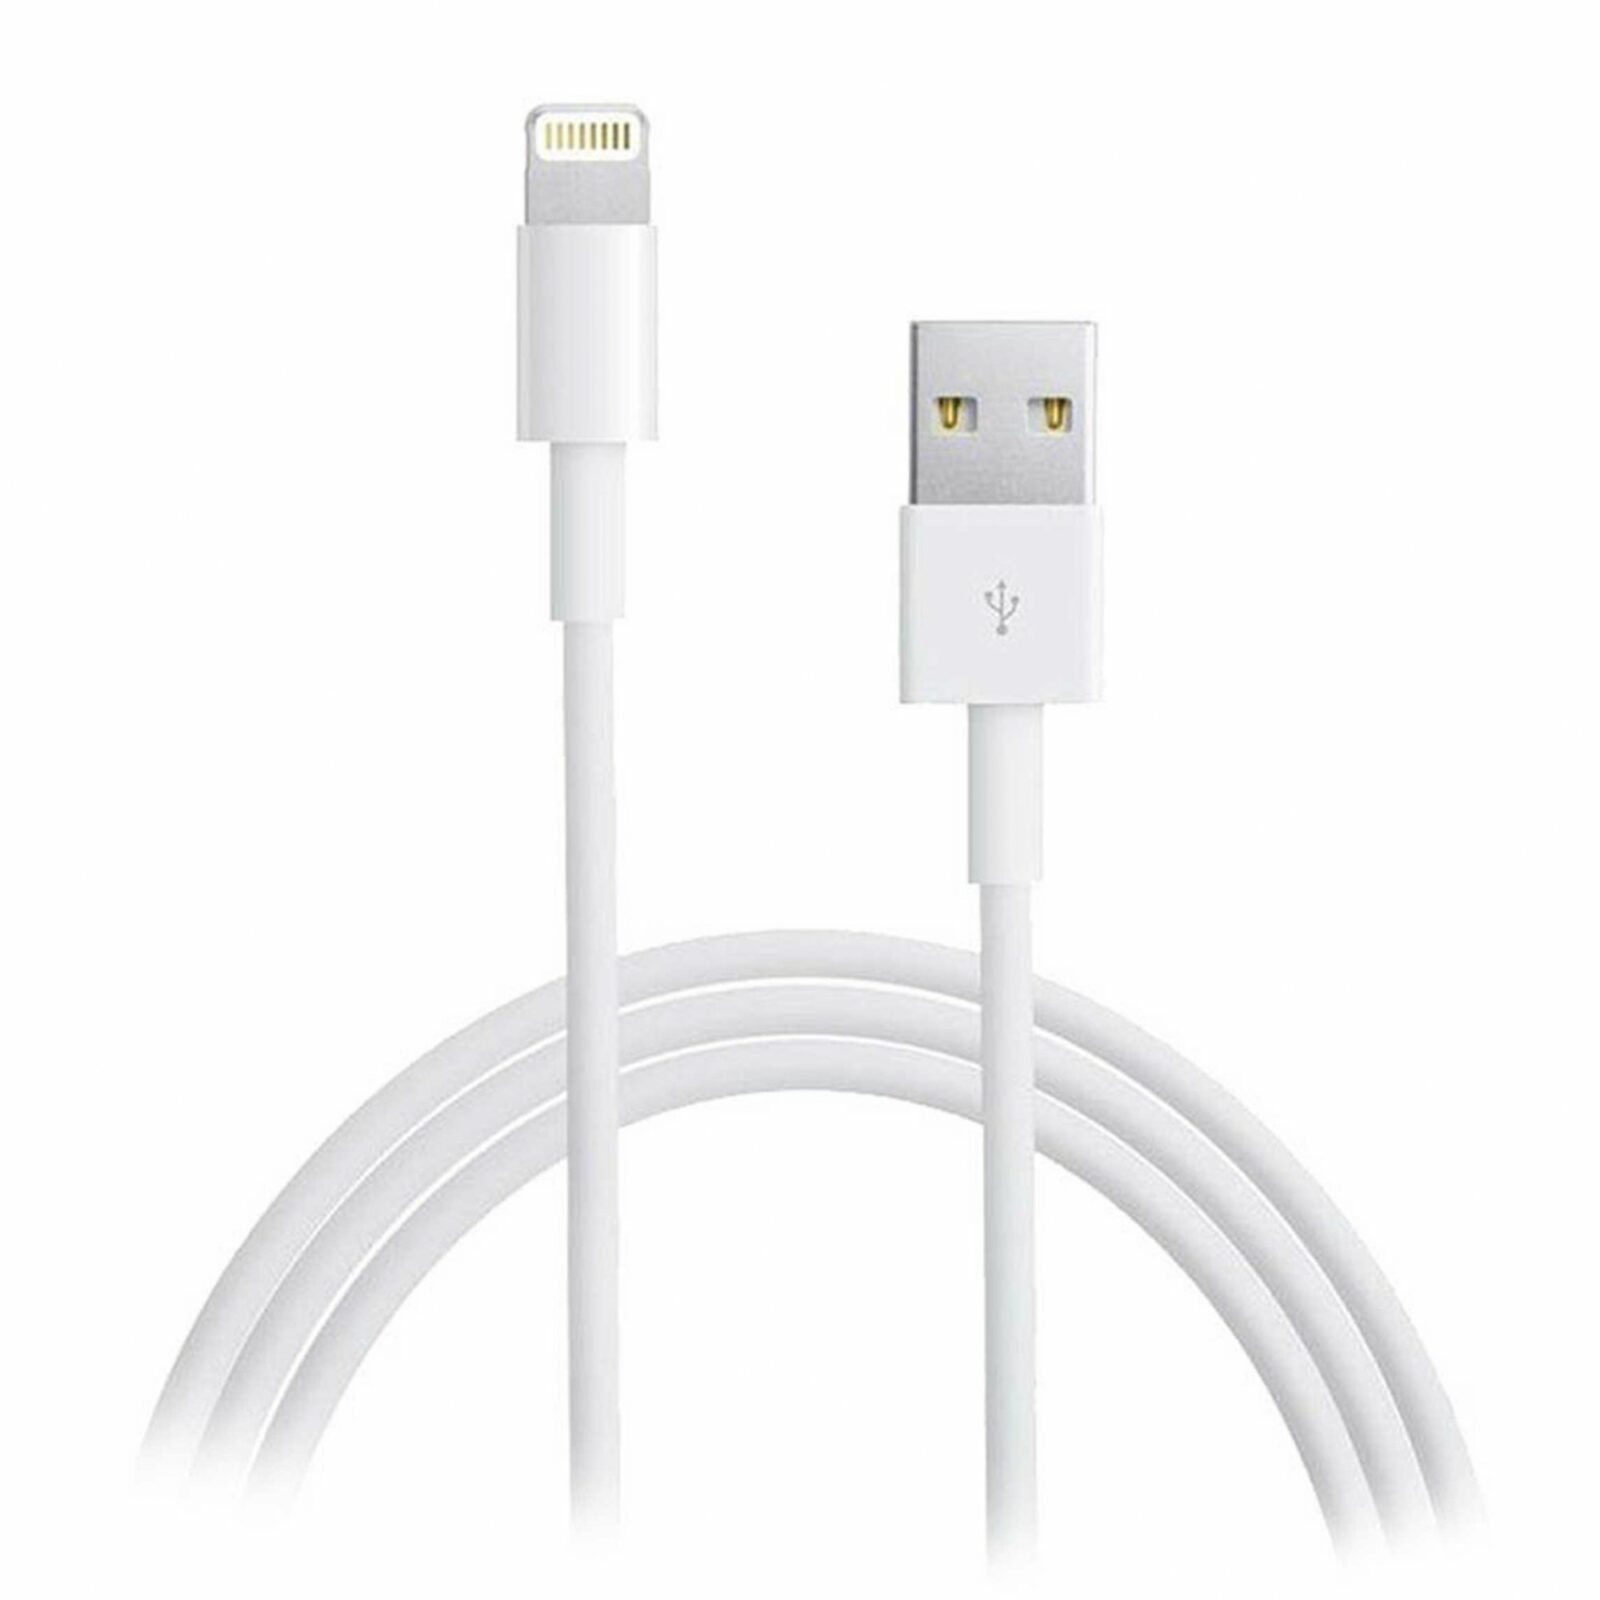 Apple Lightning to USB Cable 2 Meter - White